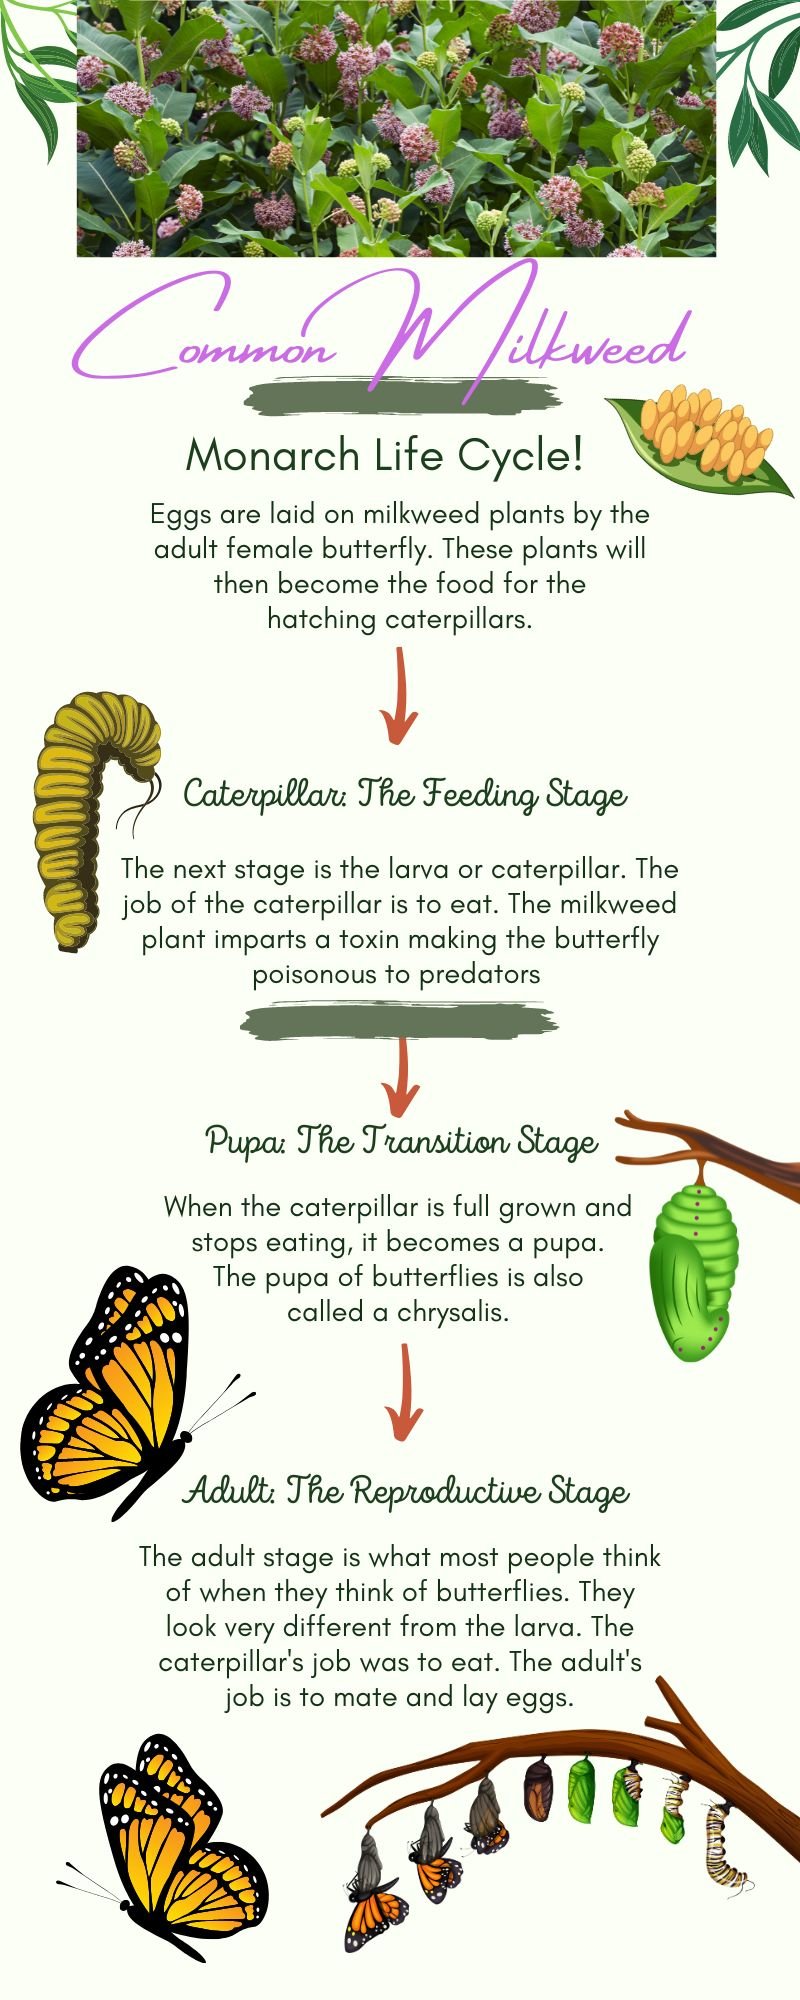 The life cycle of a Monarch on Milkweed